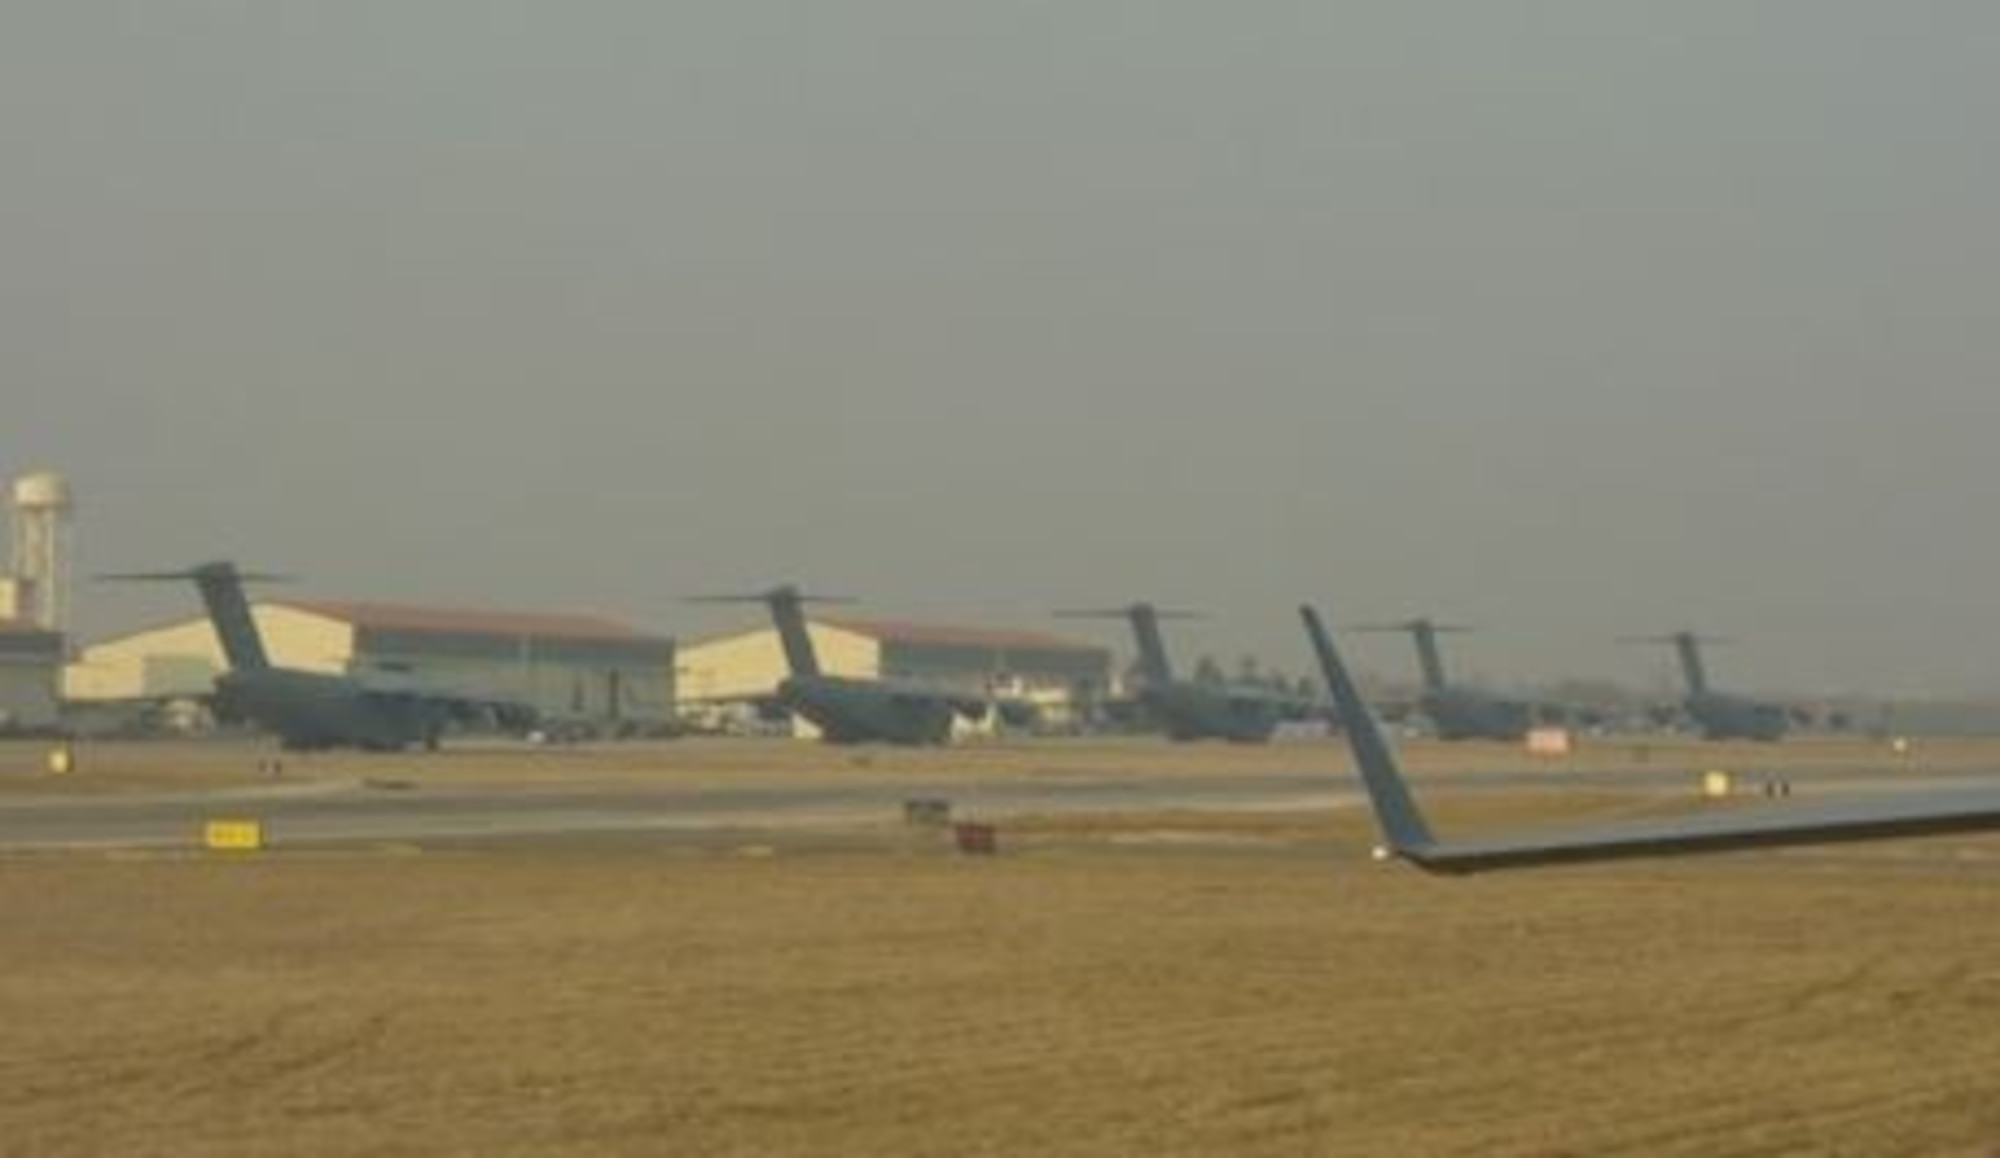 C-17 Globemaster IIIs prepare to take off from Aviano Air Base, Italy, in early 2003. (Courtesy Photo)